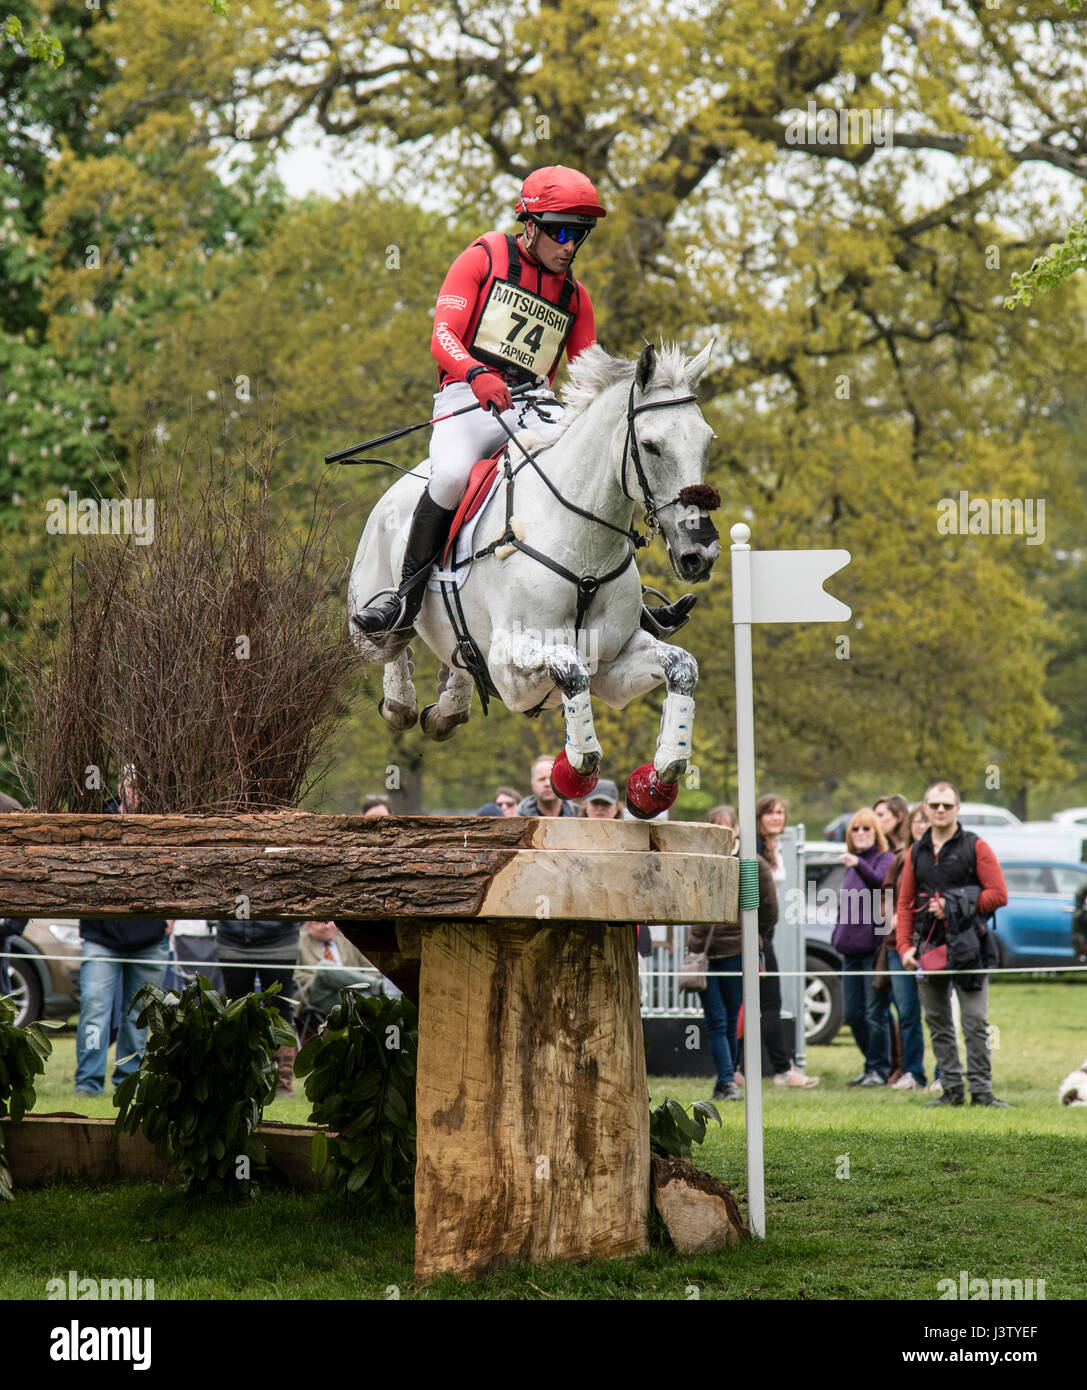 Australian rider Paul Tapner competing on Bonza King of Rouges at the Badminton Horse Trials 2017. Stock Photo